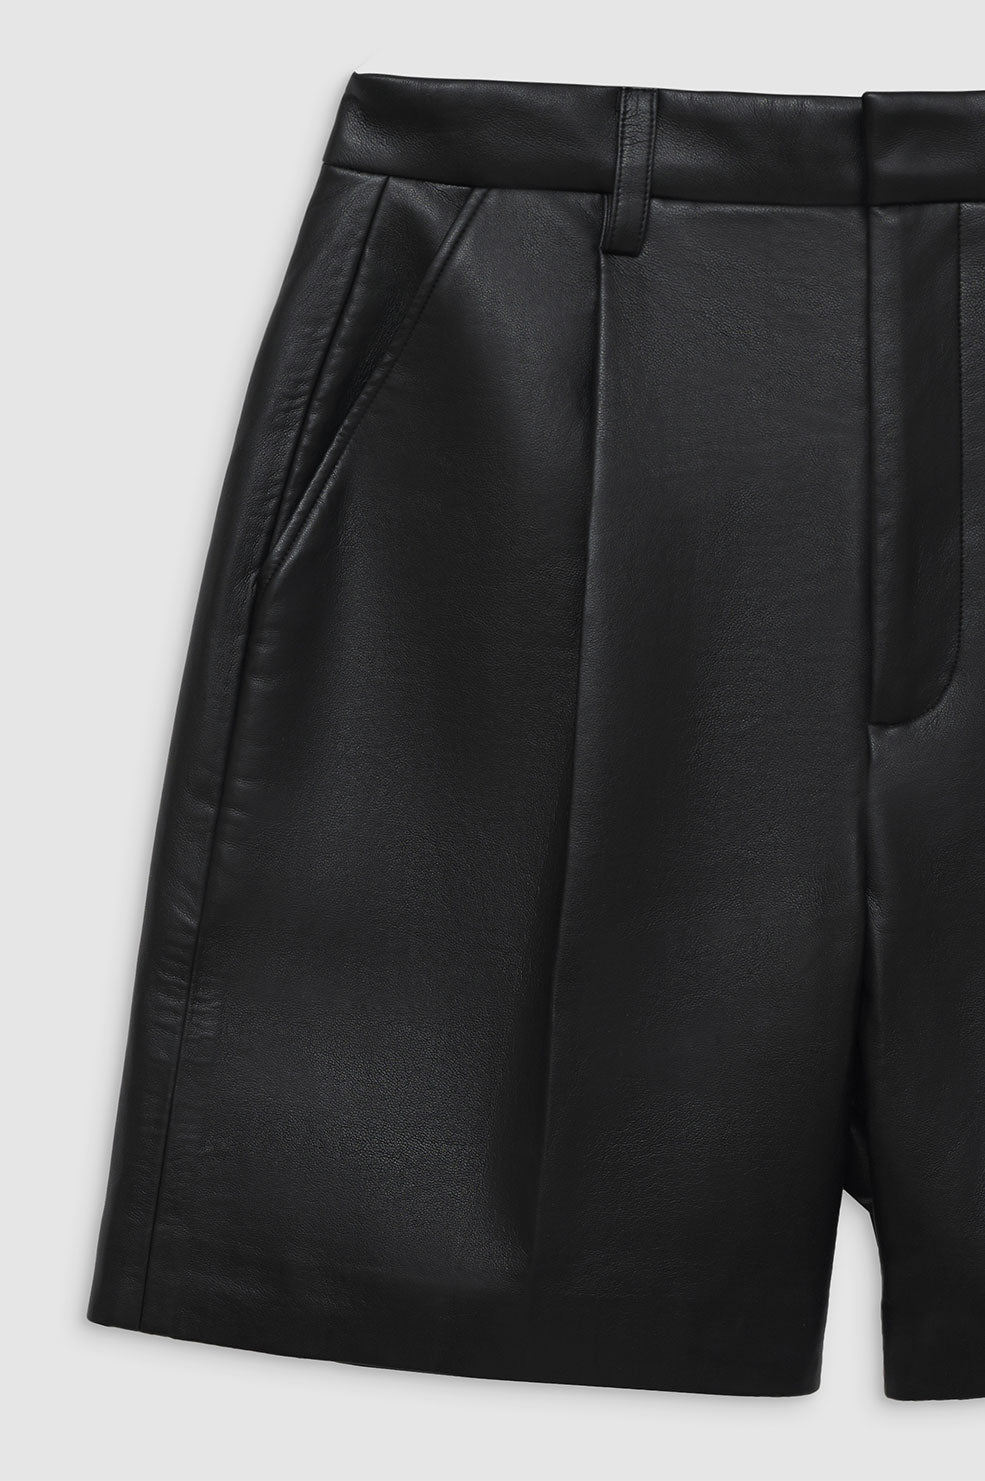 ANINE BING Carmen Short - Black Recycled Leather - Detail View